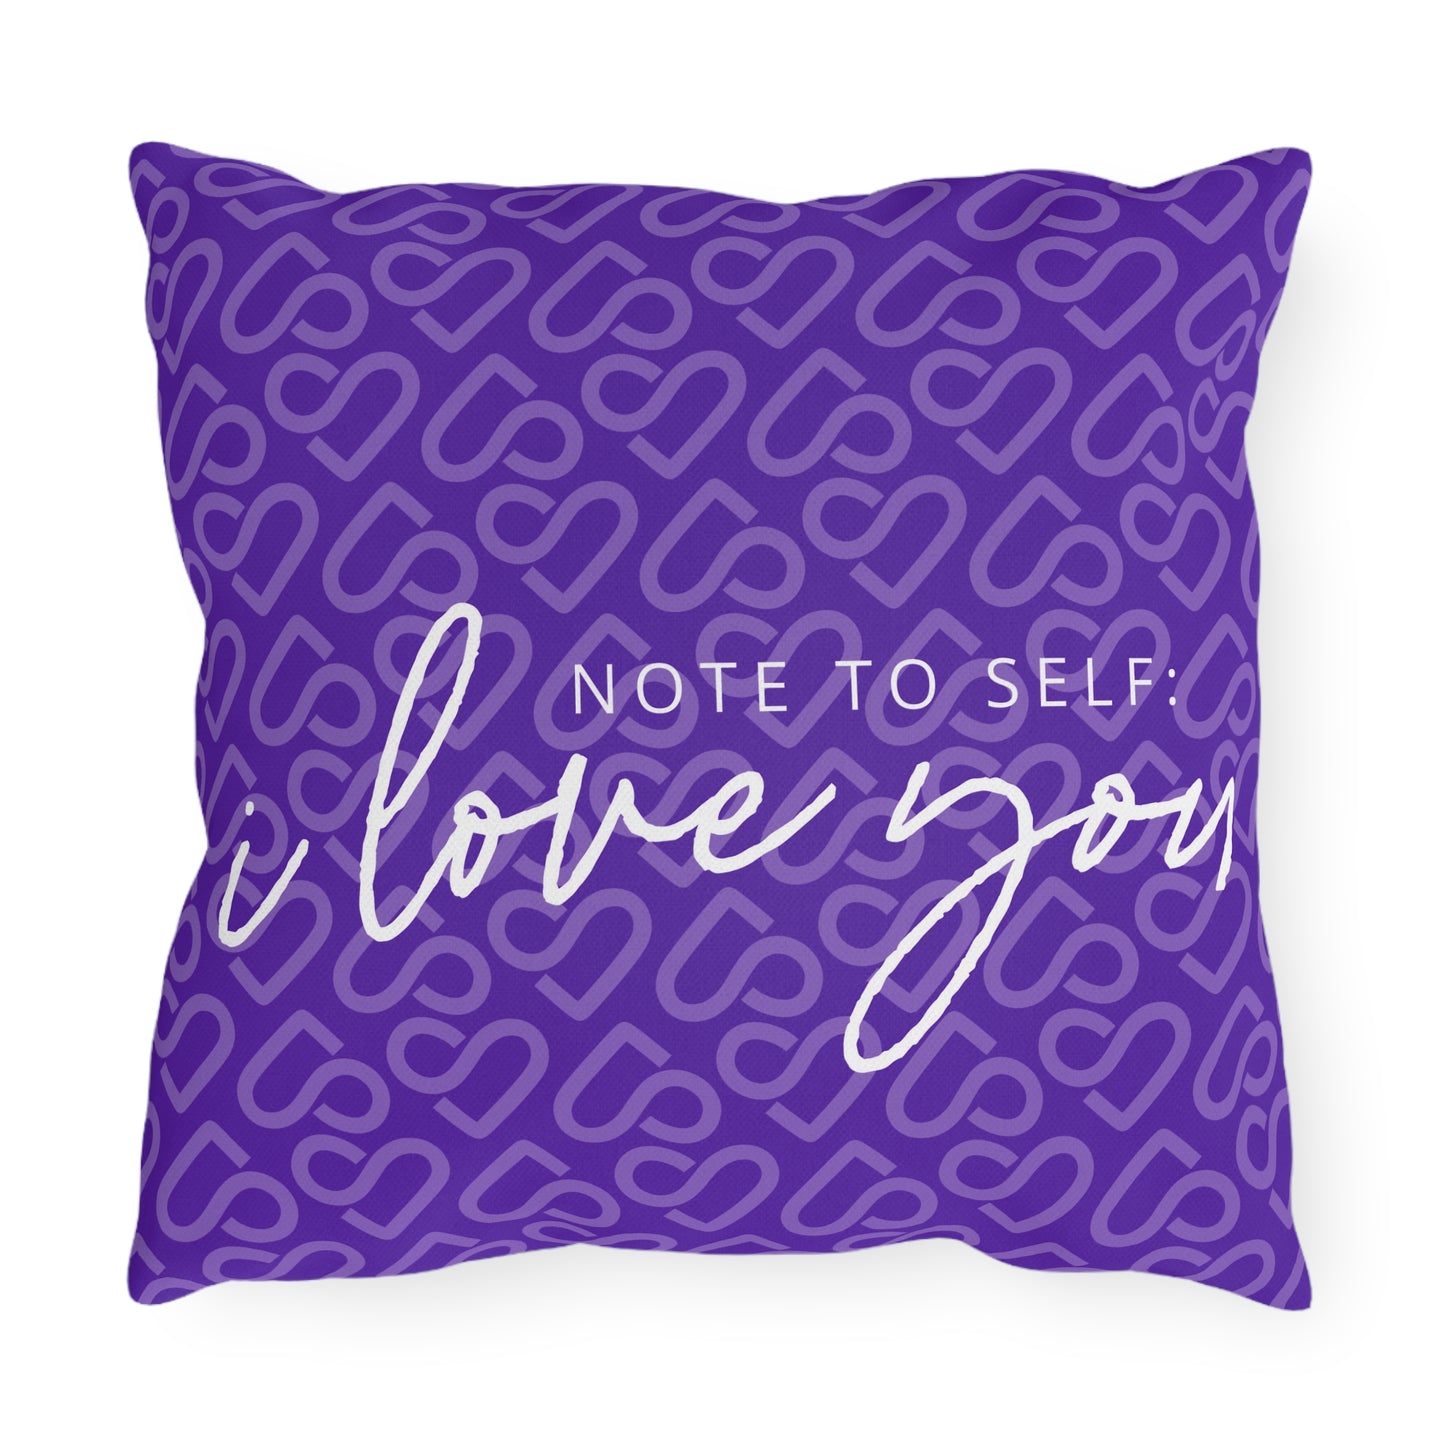 Self Care on the Green SL Green Logo Square Pillow